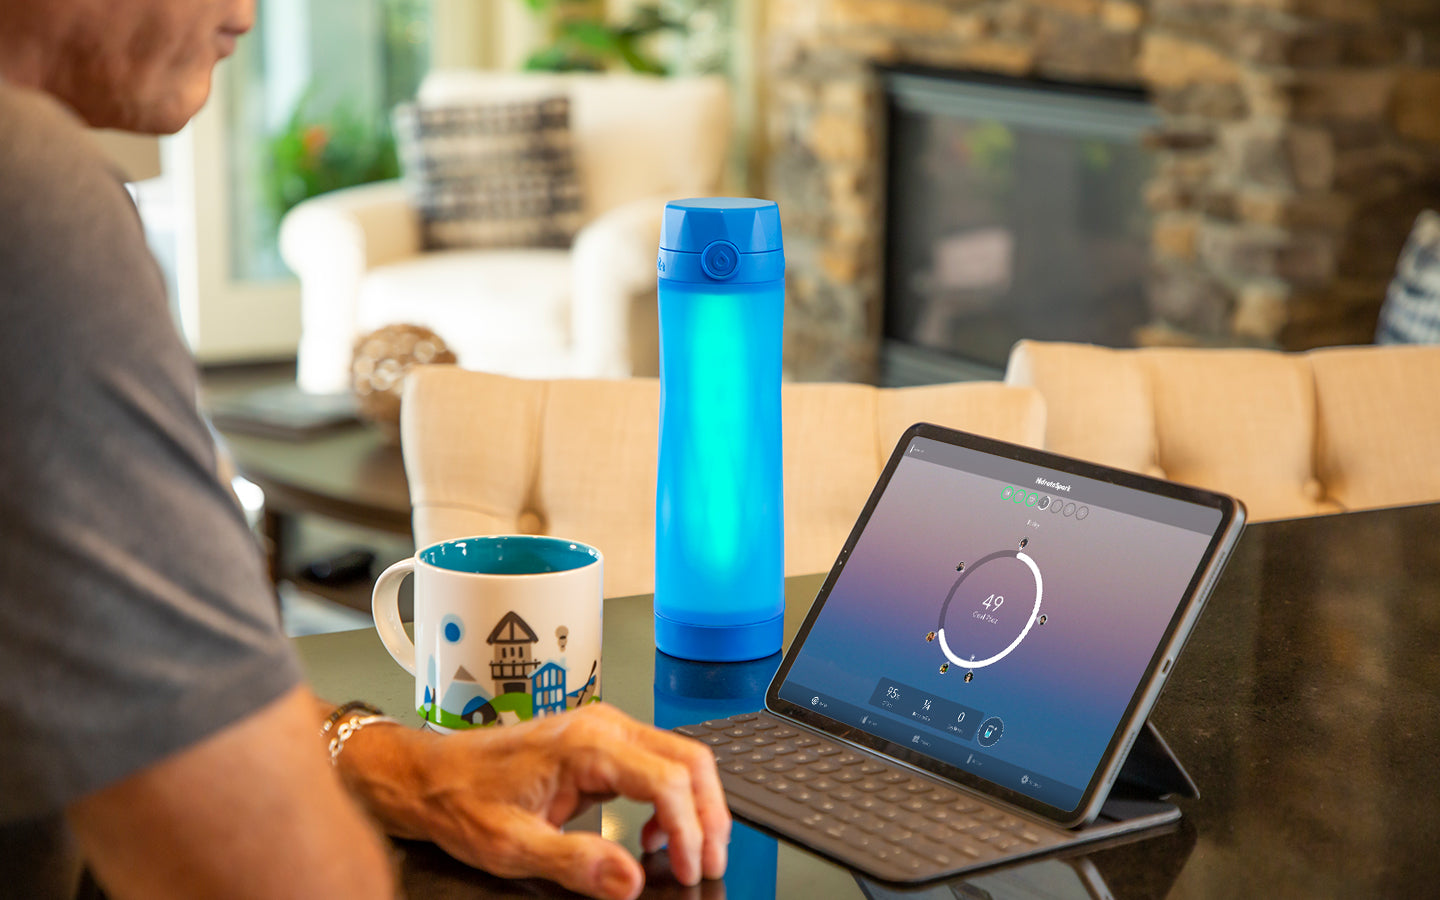 royal blue hidrate spark 3 bluetooth smart water bottler glowing green on kitchen counter next to an iPad. 